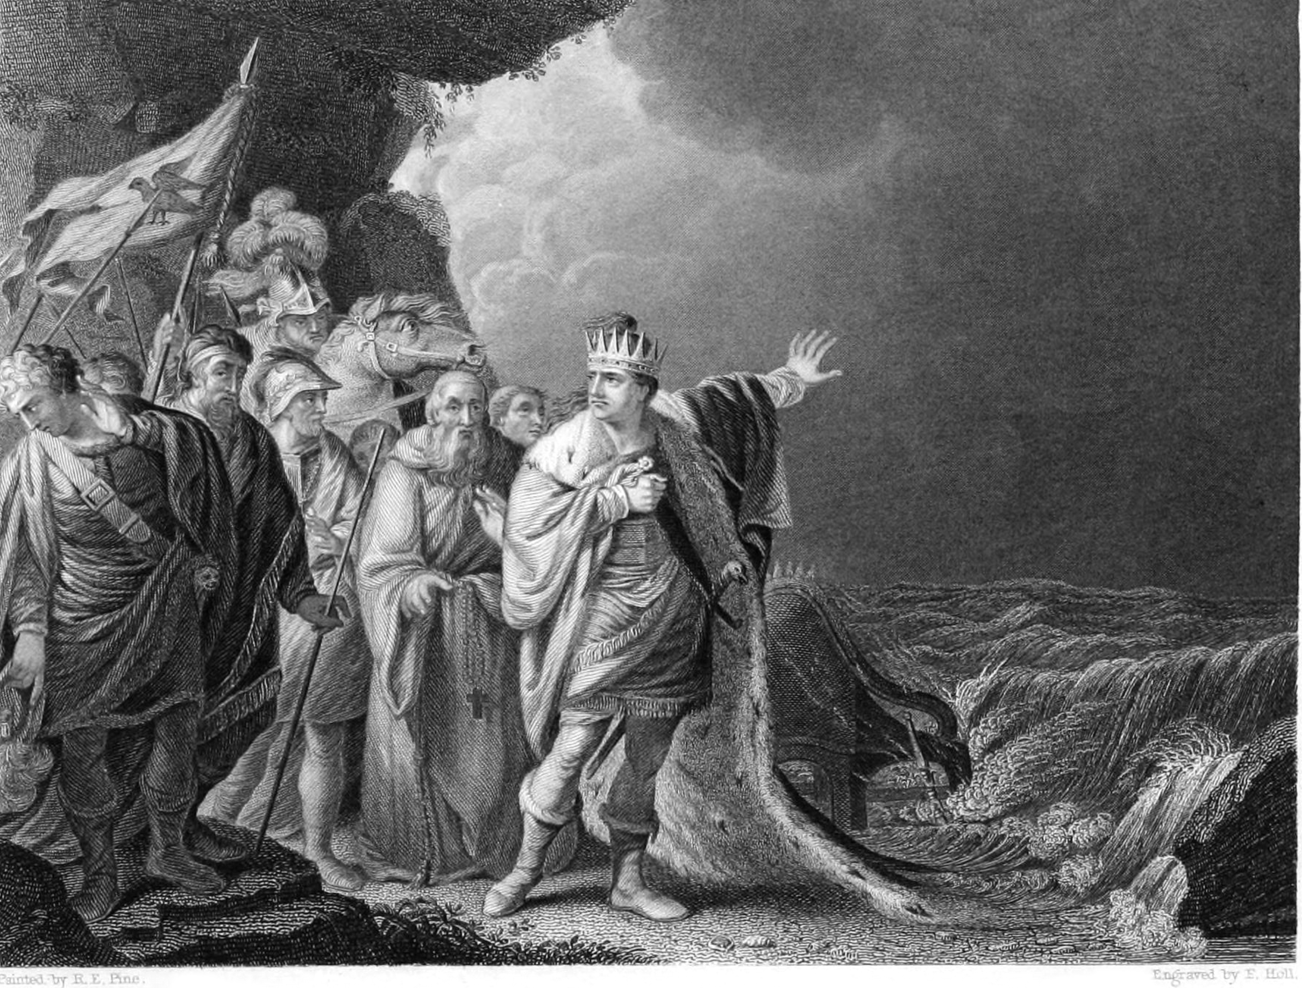 engraving from mid-19th century of Canute ordering waves to recede